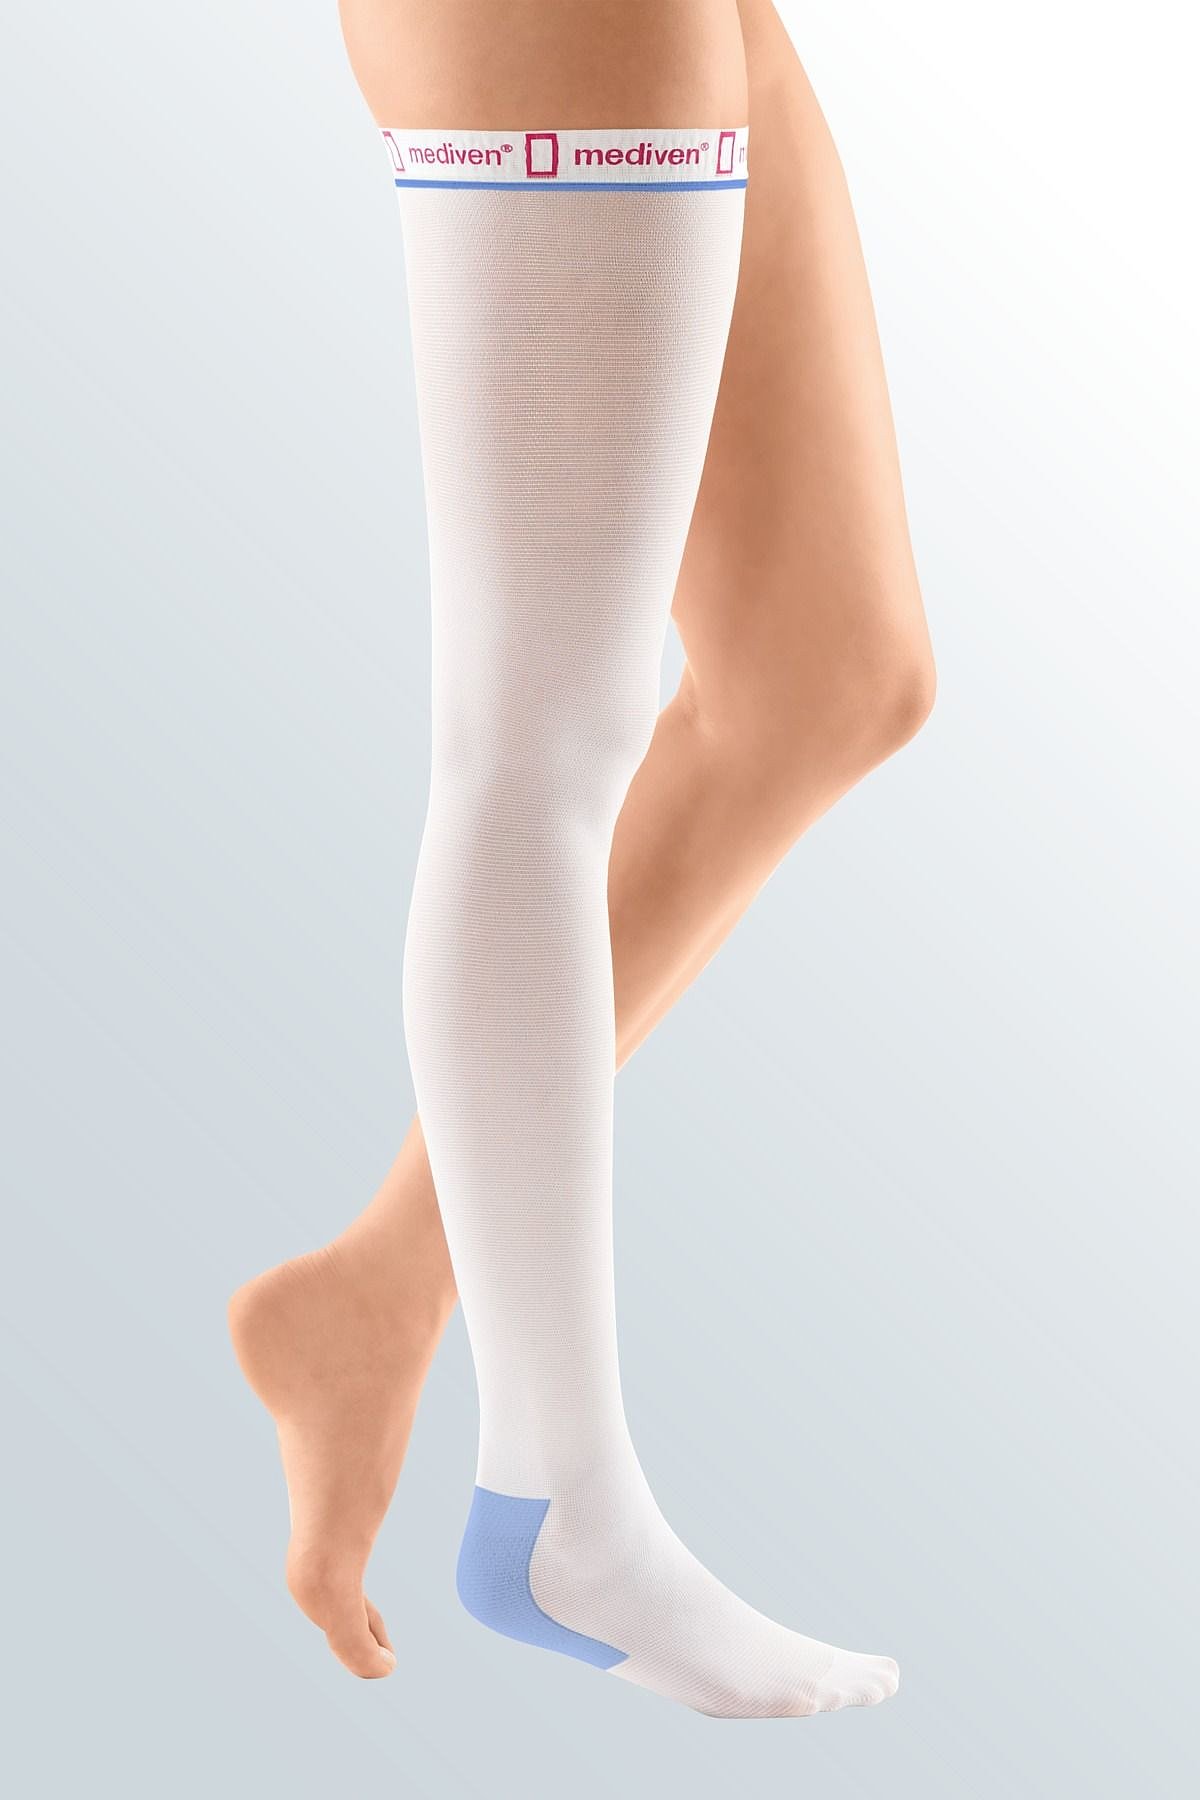 mediven Thrombexin 18 mmHg Compression Calf High DVT Compression Stock –  Wasatch Medical Supply